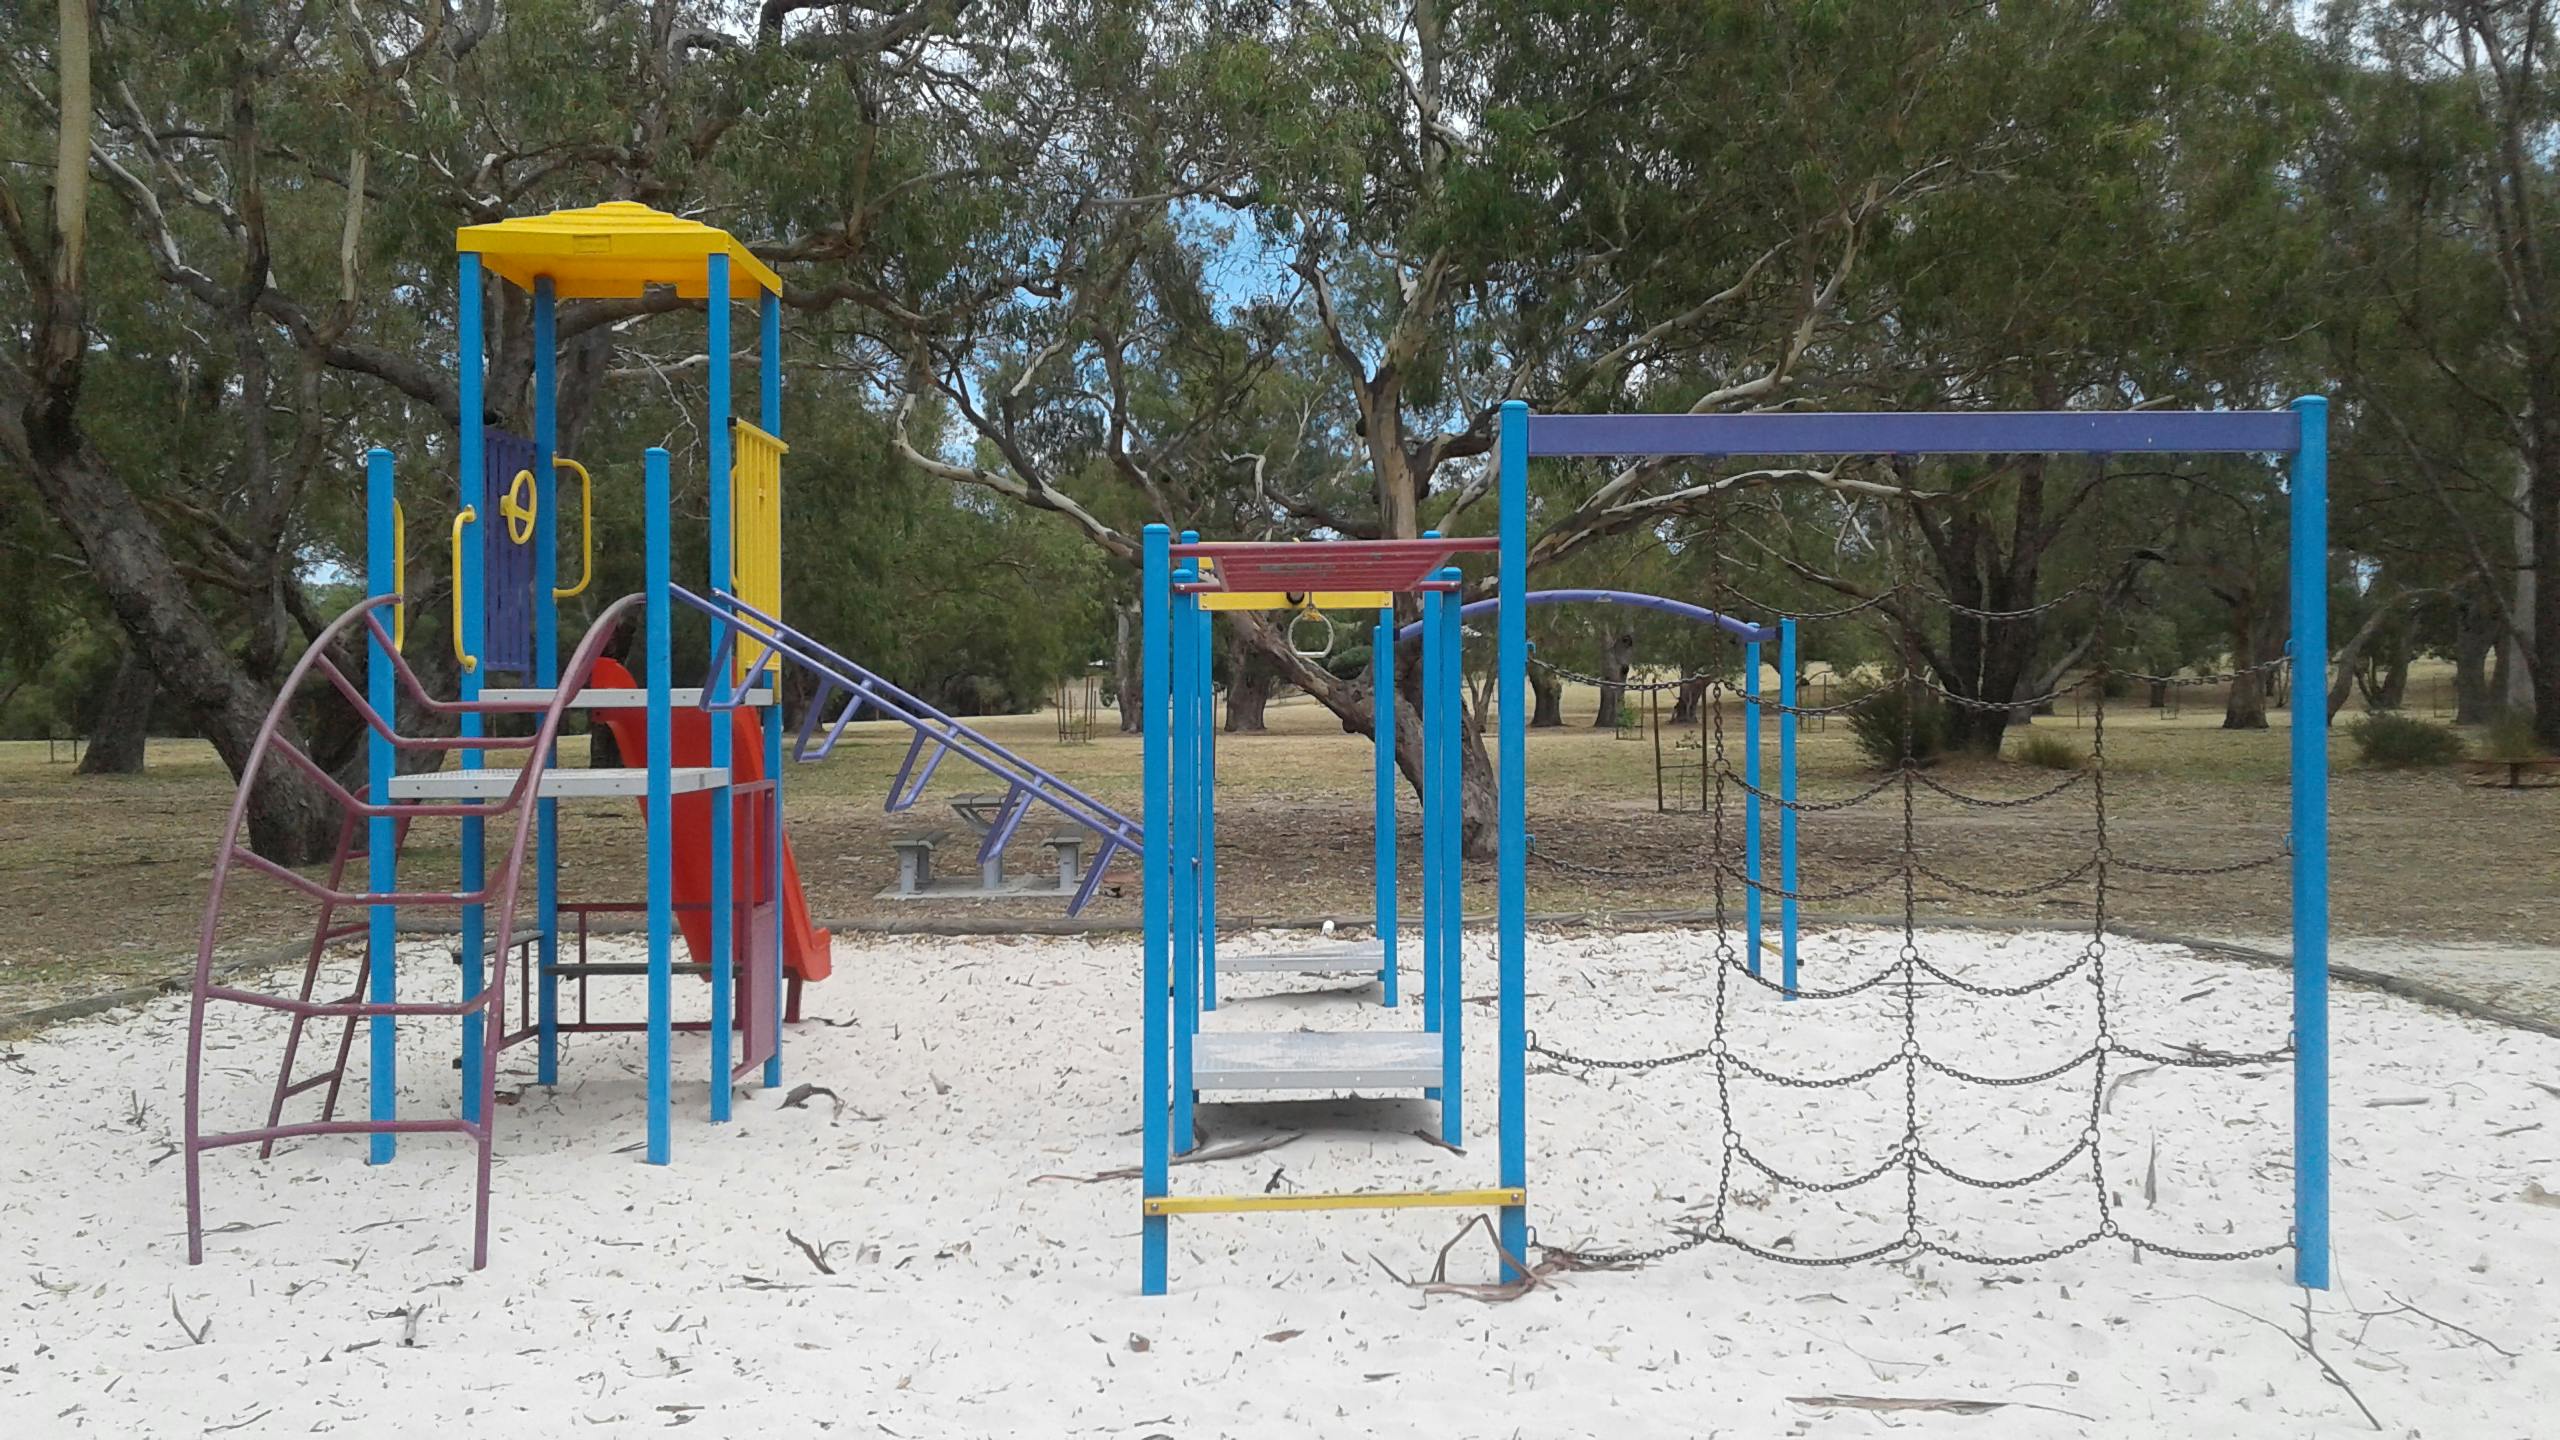 Existing play equipment at Claughton Reserve